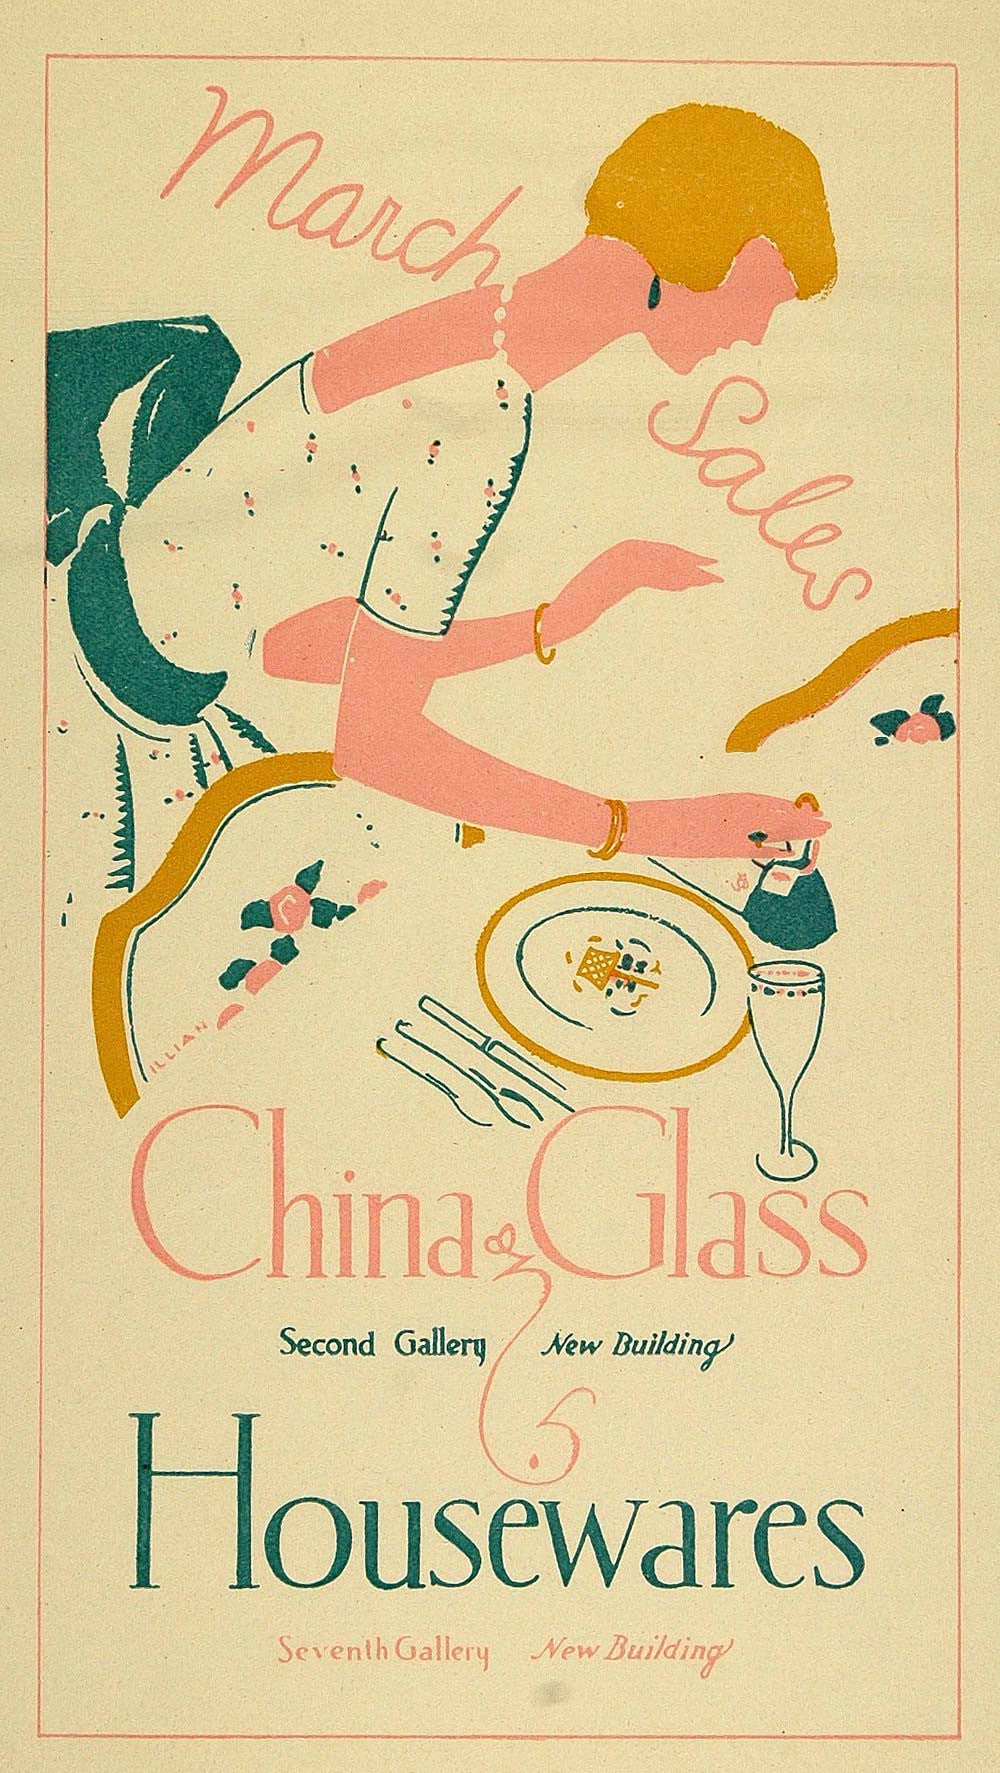 1924 Lithograph George Illian Mini Poster Table Setting China Glass Housewares - Period Paper
